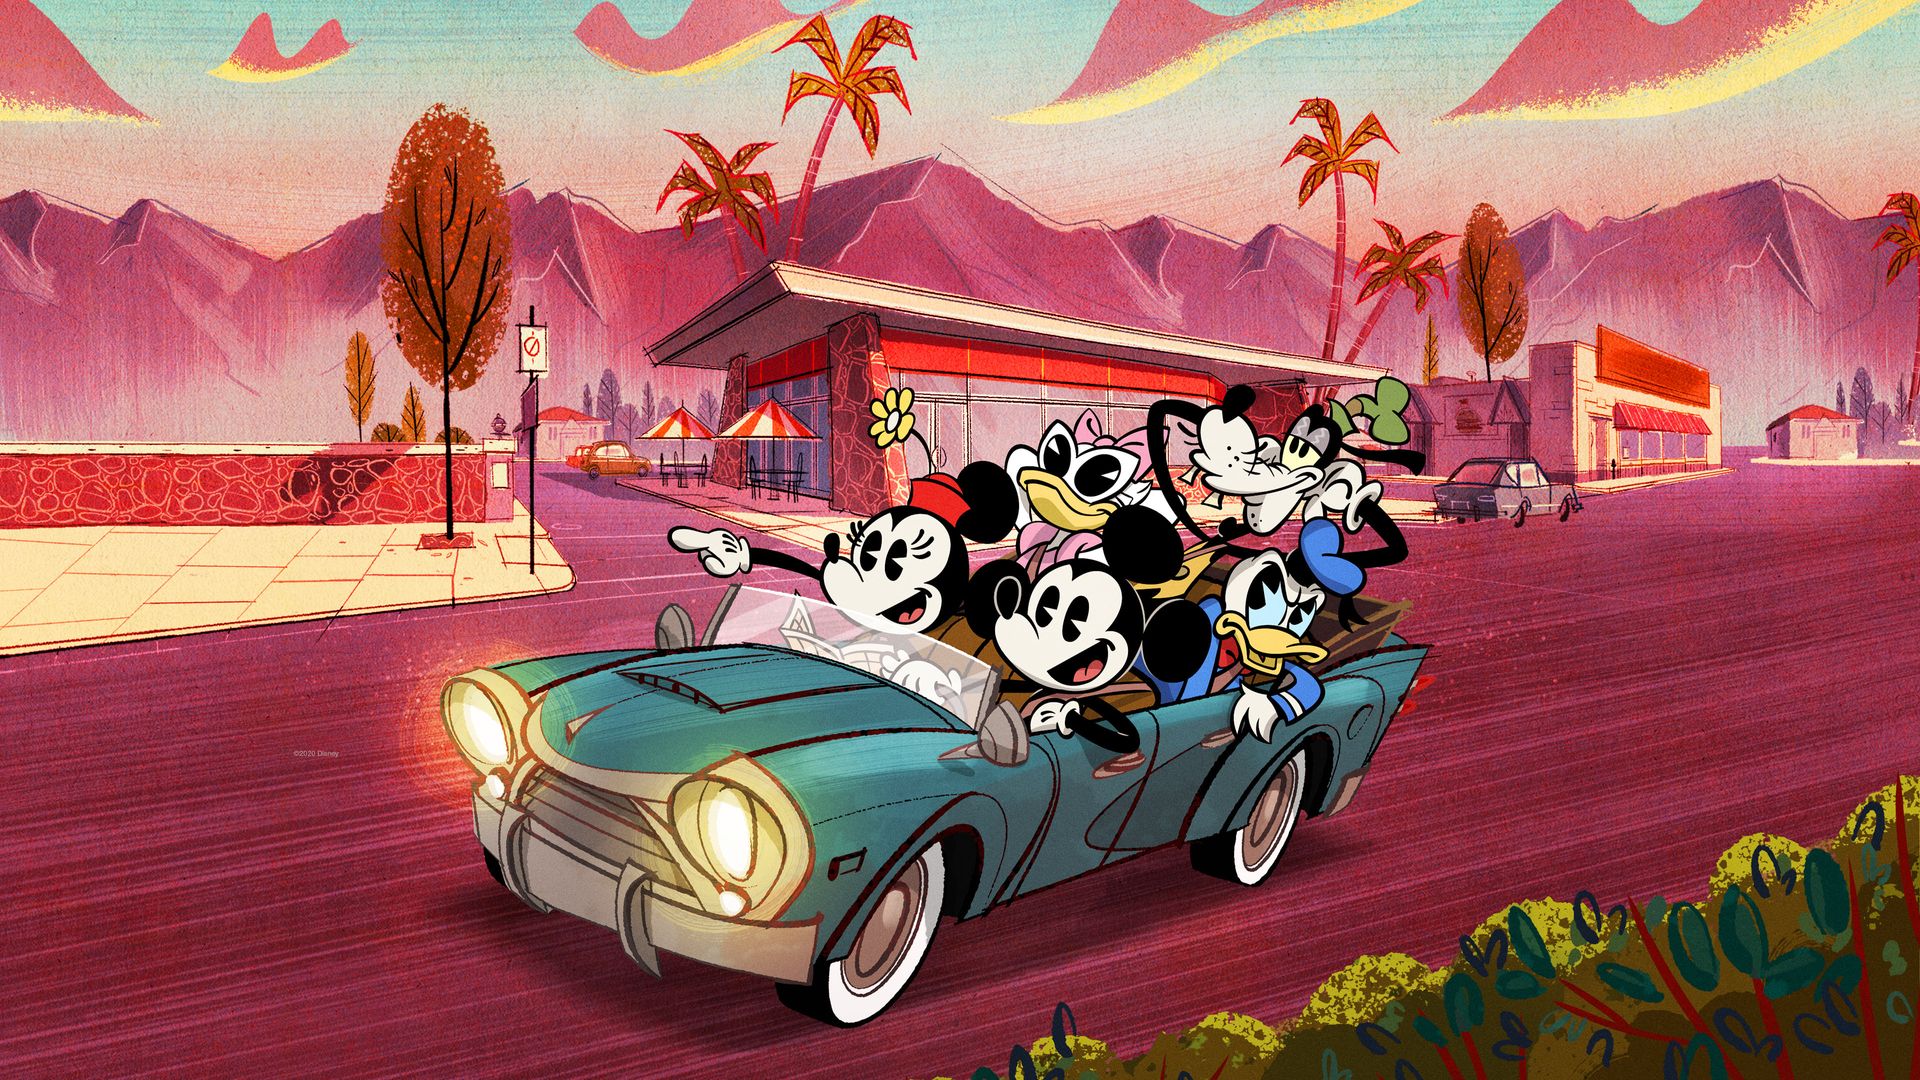 The Wonderful World of Mickey Mouse background